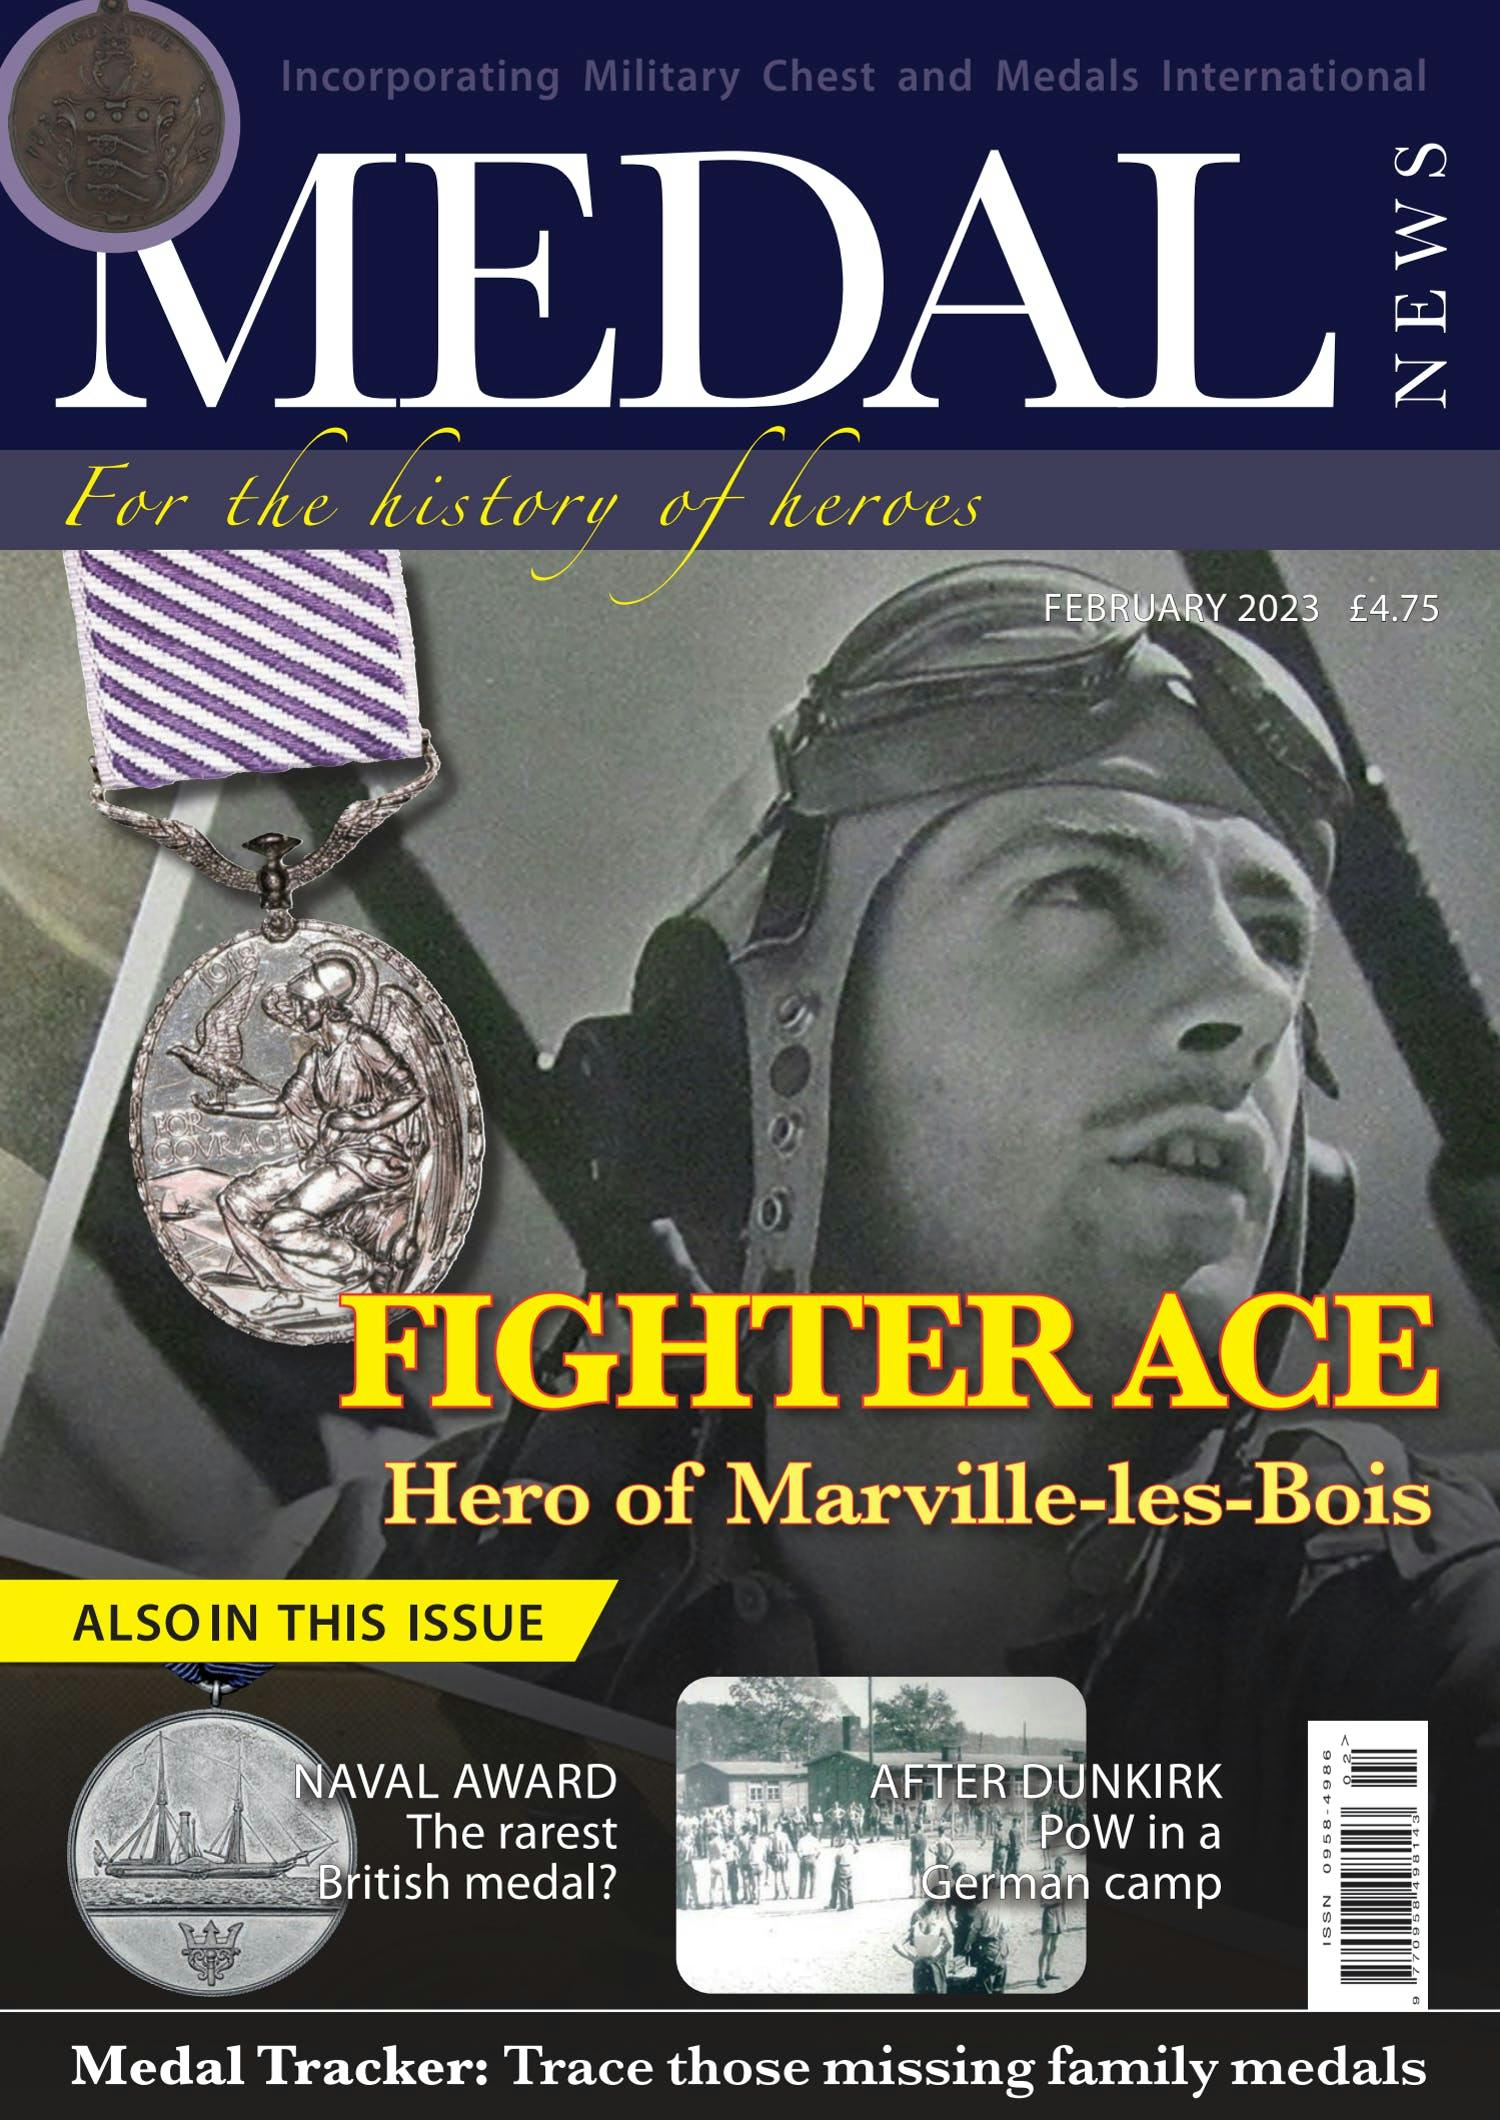 The front cover of Medal News, Volume 61, Number 2, February 2023